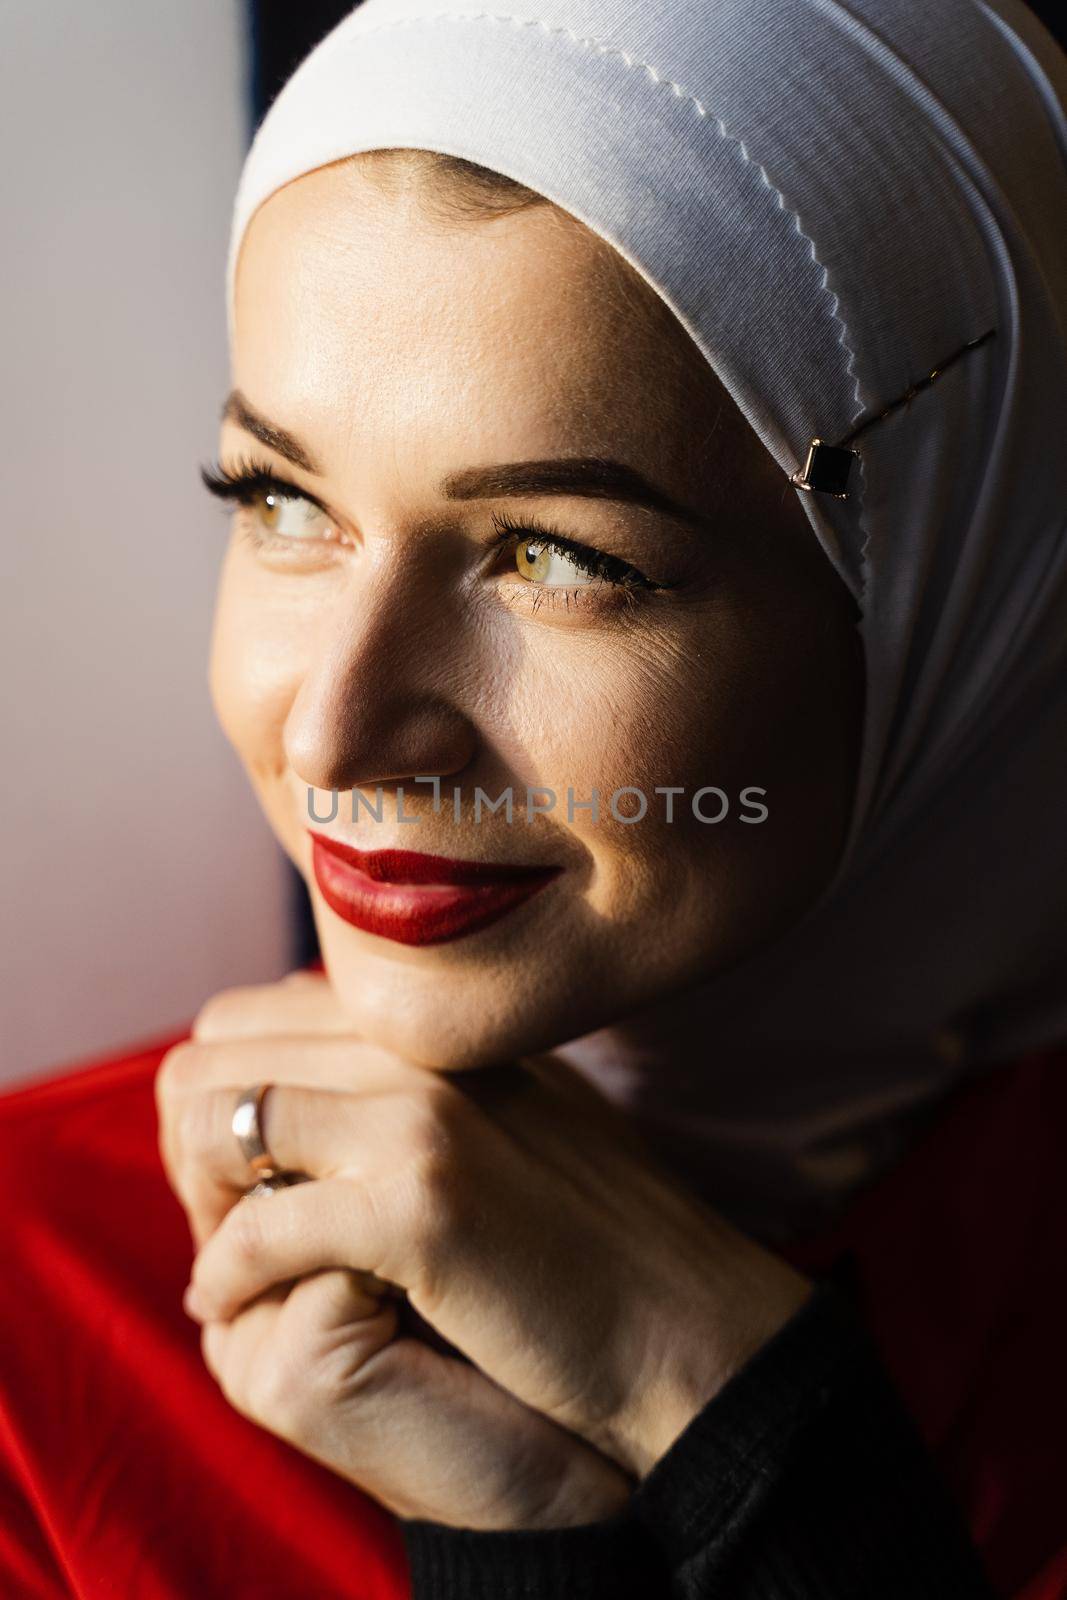 Muslim girl is praying at home. Close-up portrait of muslim model weared in traditional islamic scarf. Islam religion